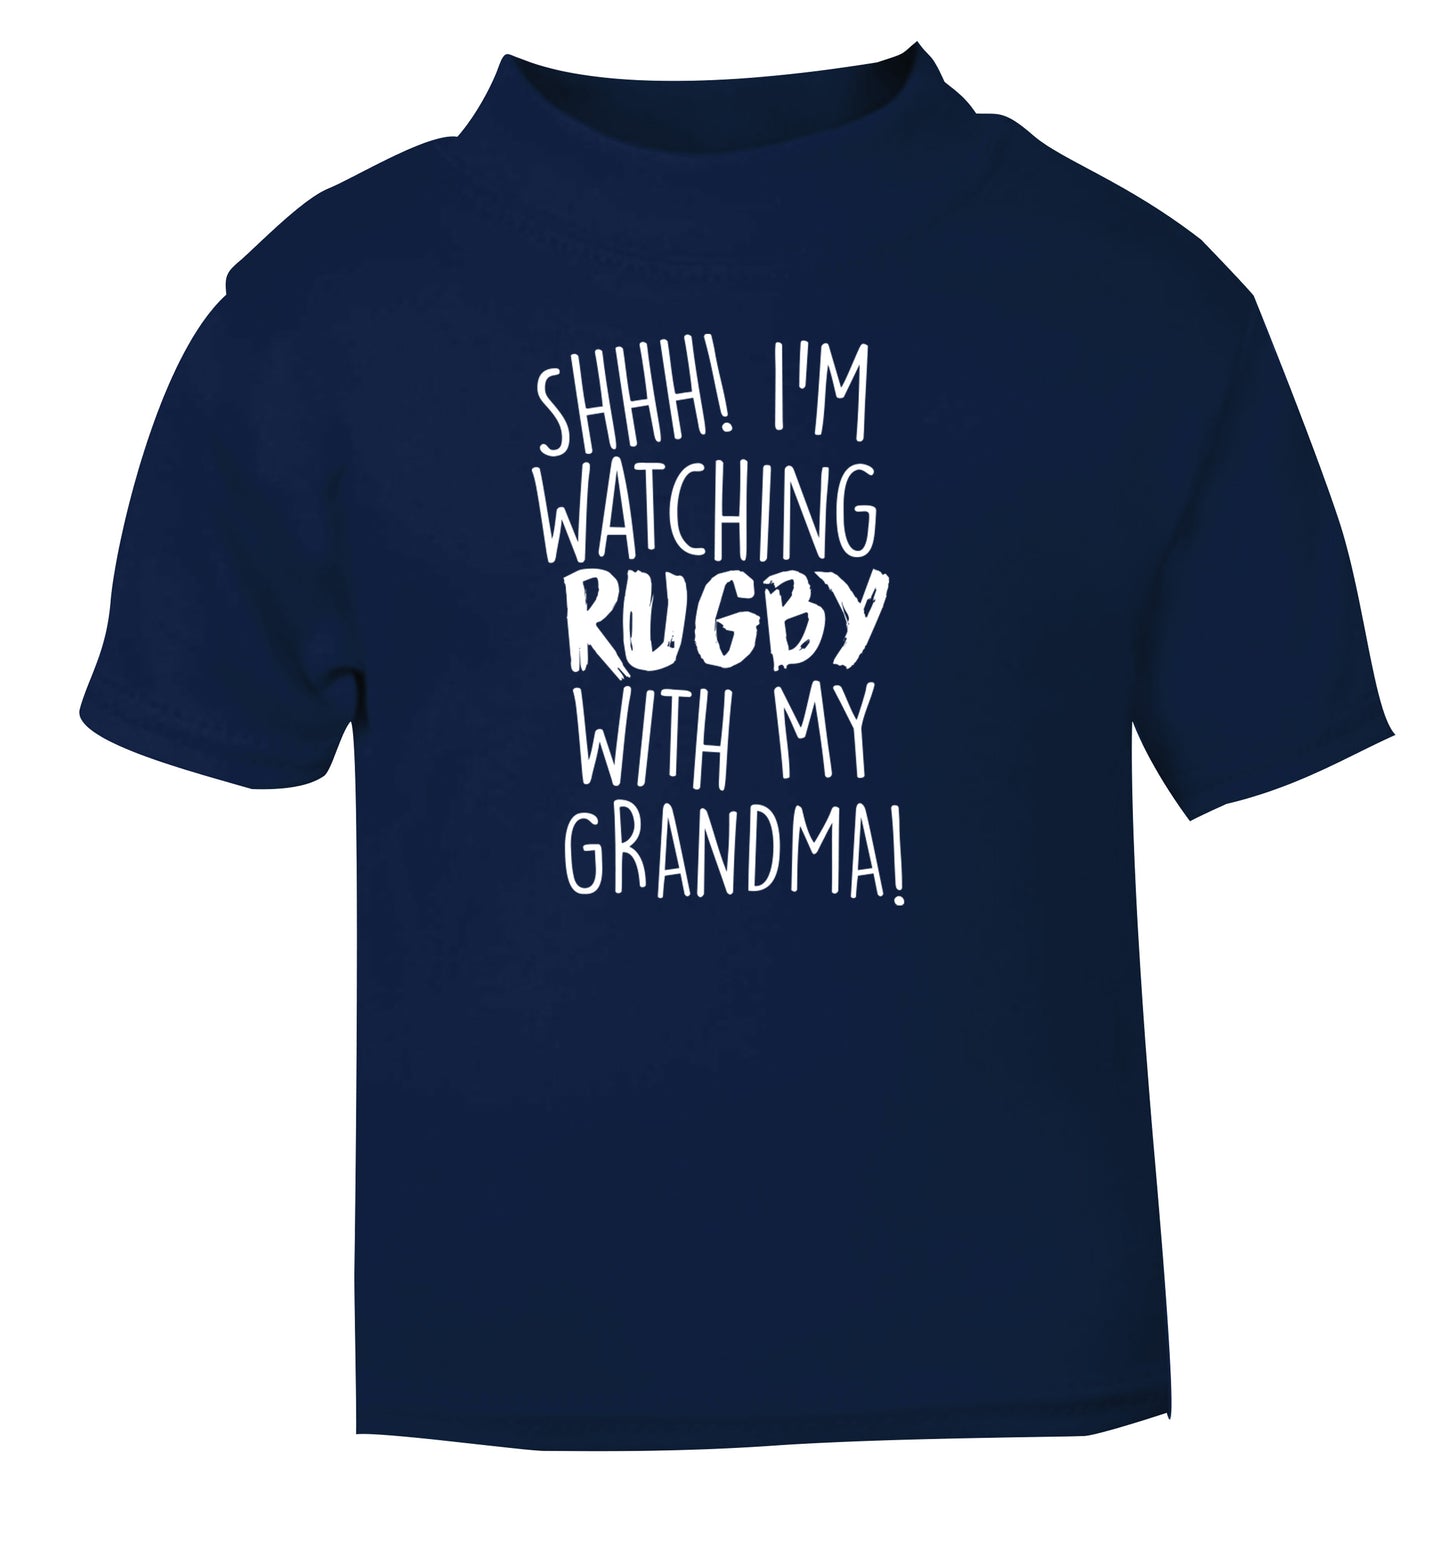 Shh I'm watching rugby with my grandma navy Baby Toddler Tshirt 2 Years